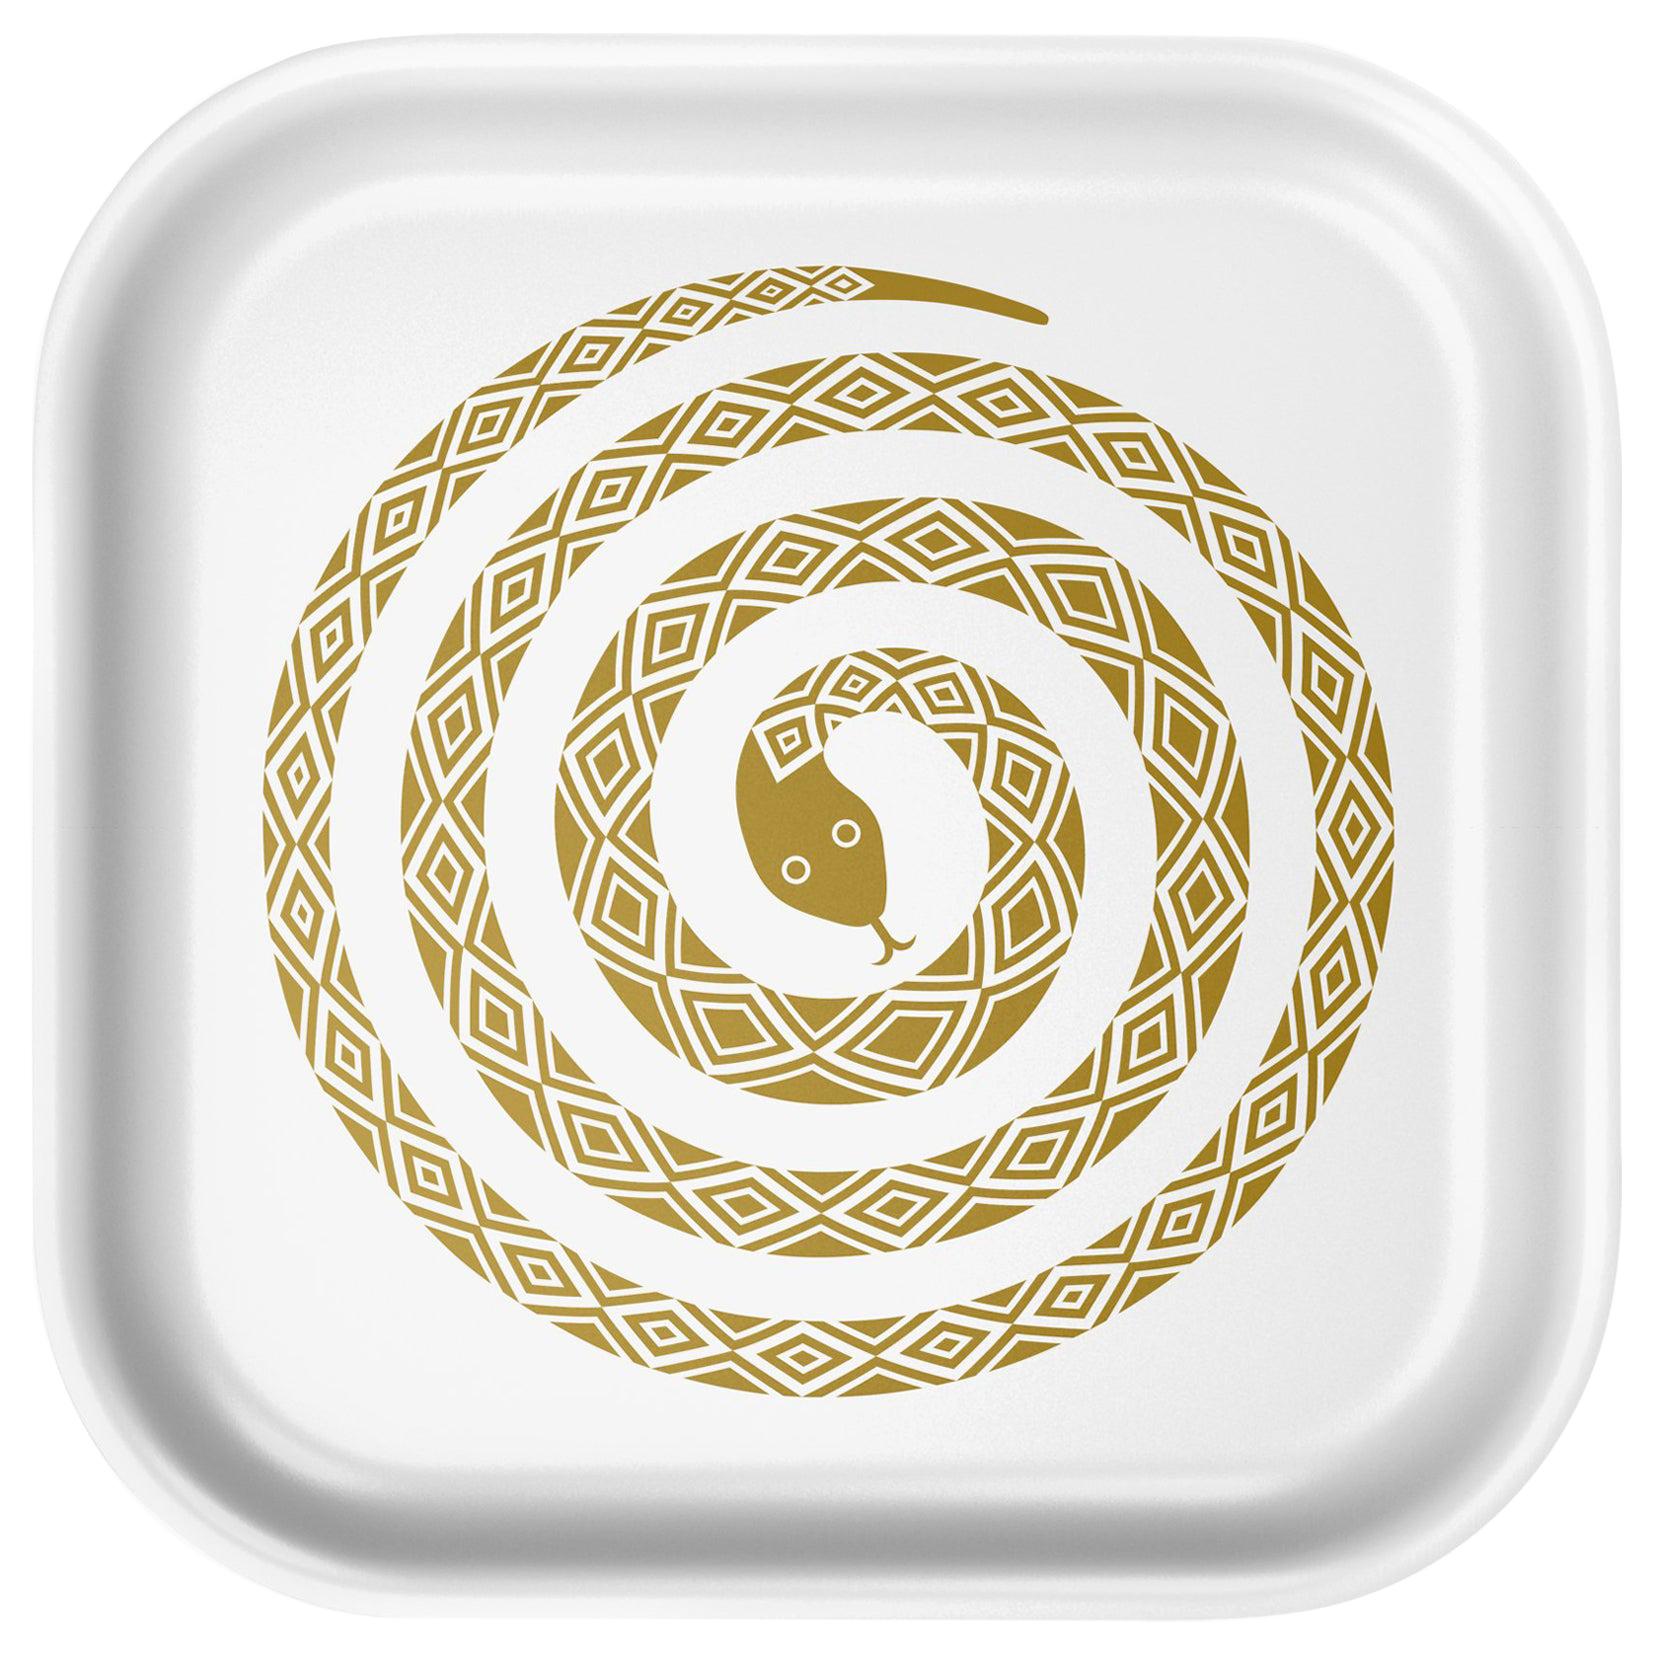 Vitra Small Classic Tray in Snake Design by Alexander Girard